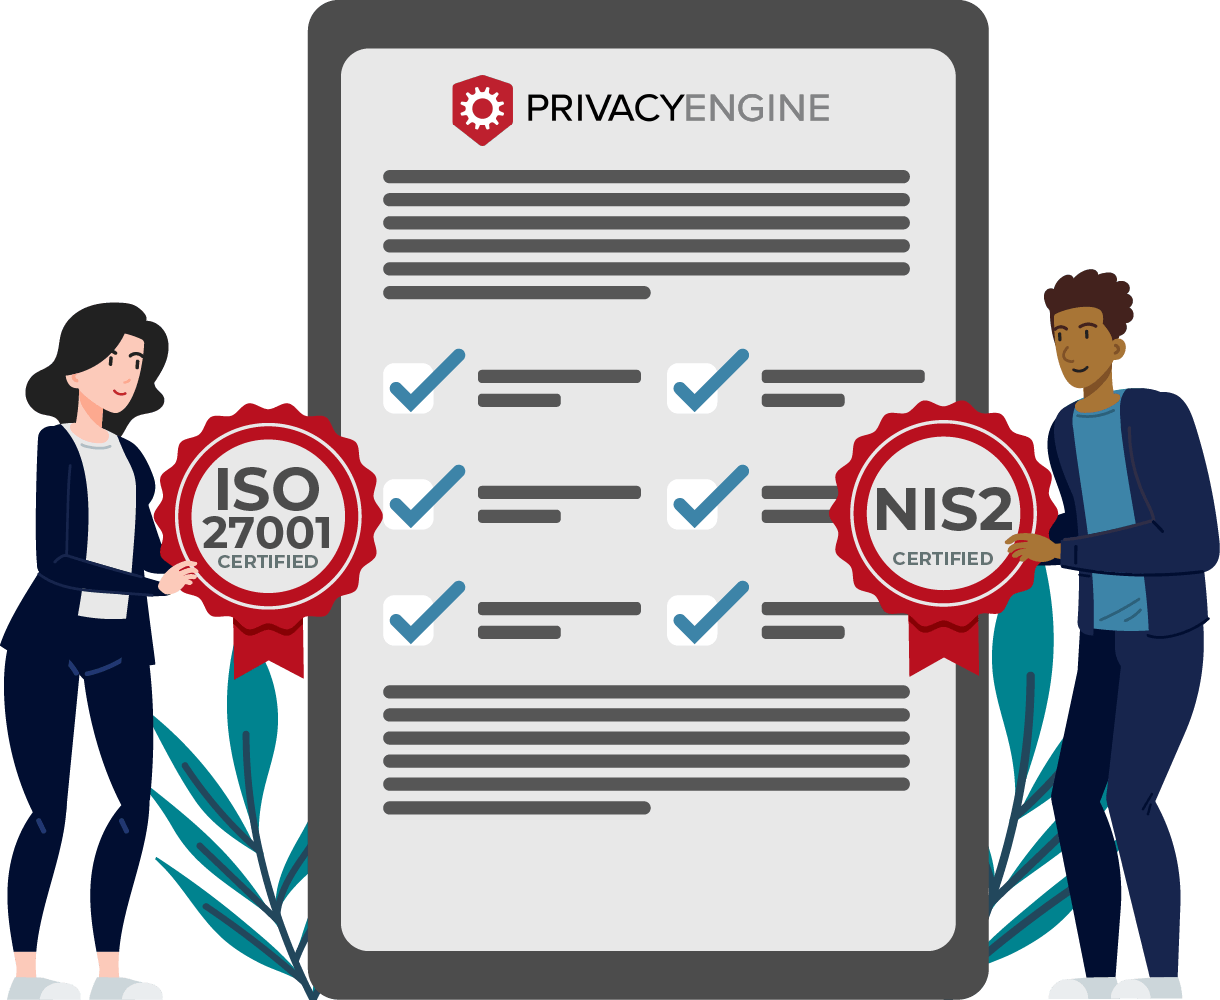 What is the difference between ISO 27001 and NIS2?